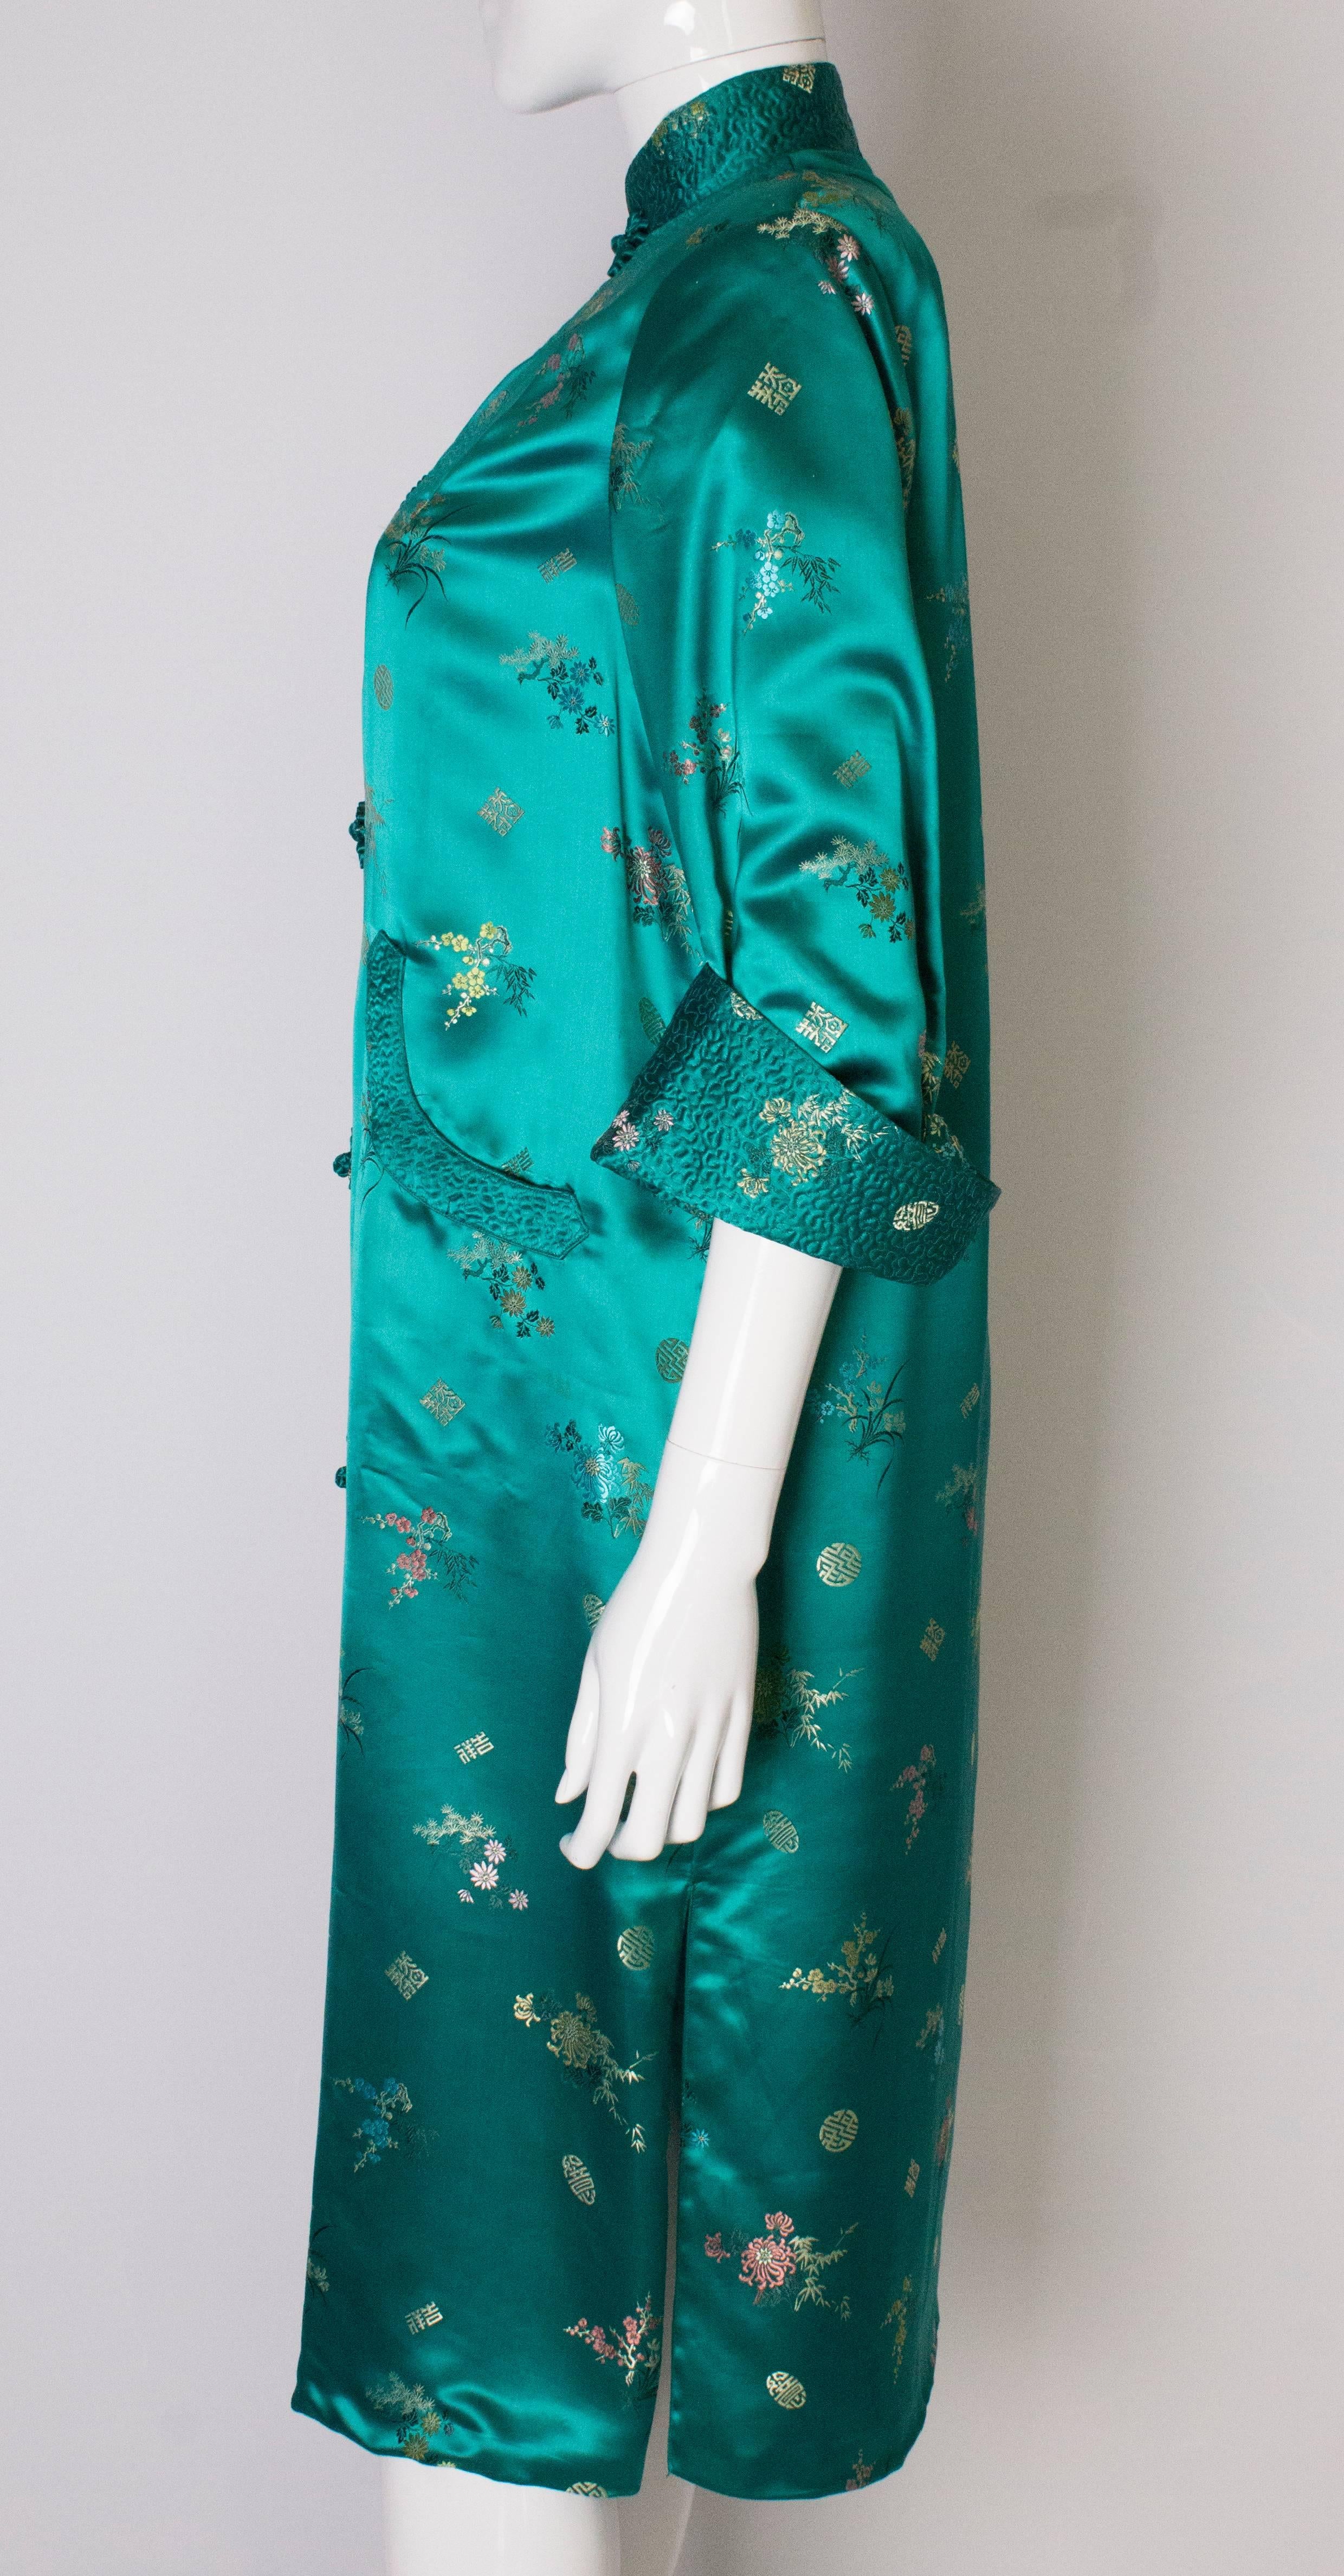 A Vintage 1970s turquoise Chinese Coat with Standup Collar & Decorative Pockets 1